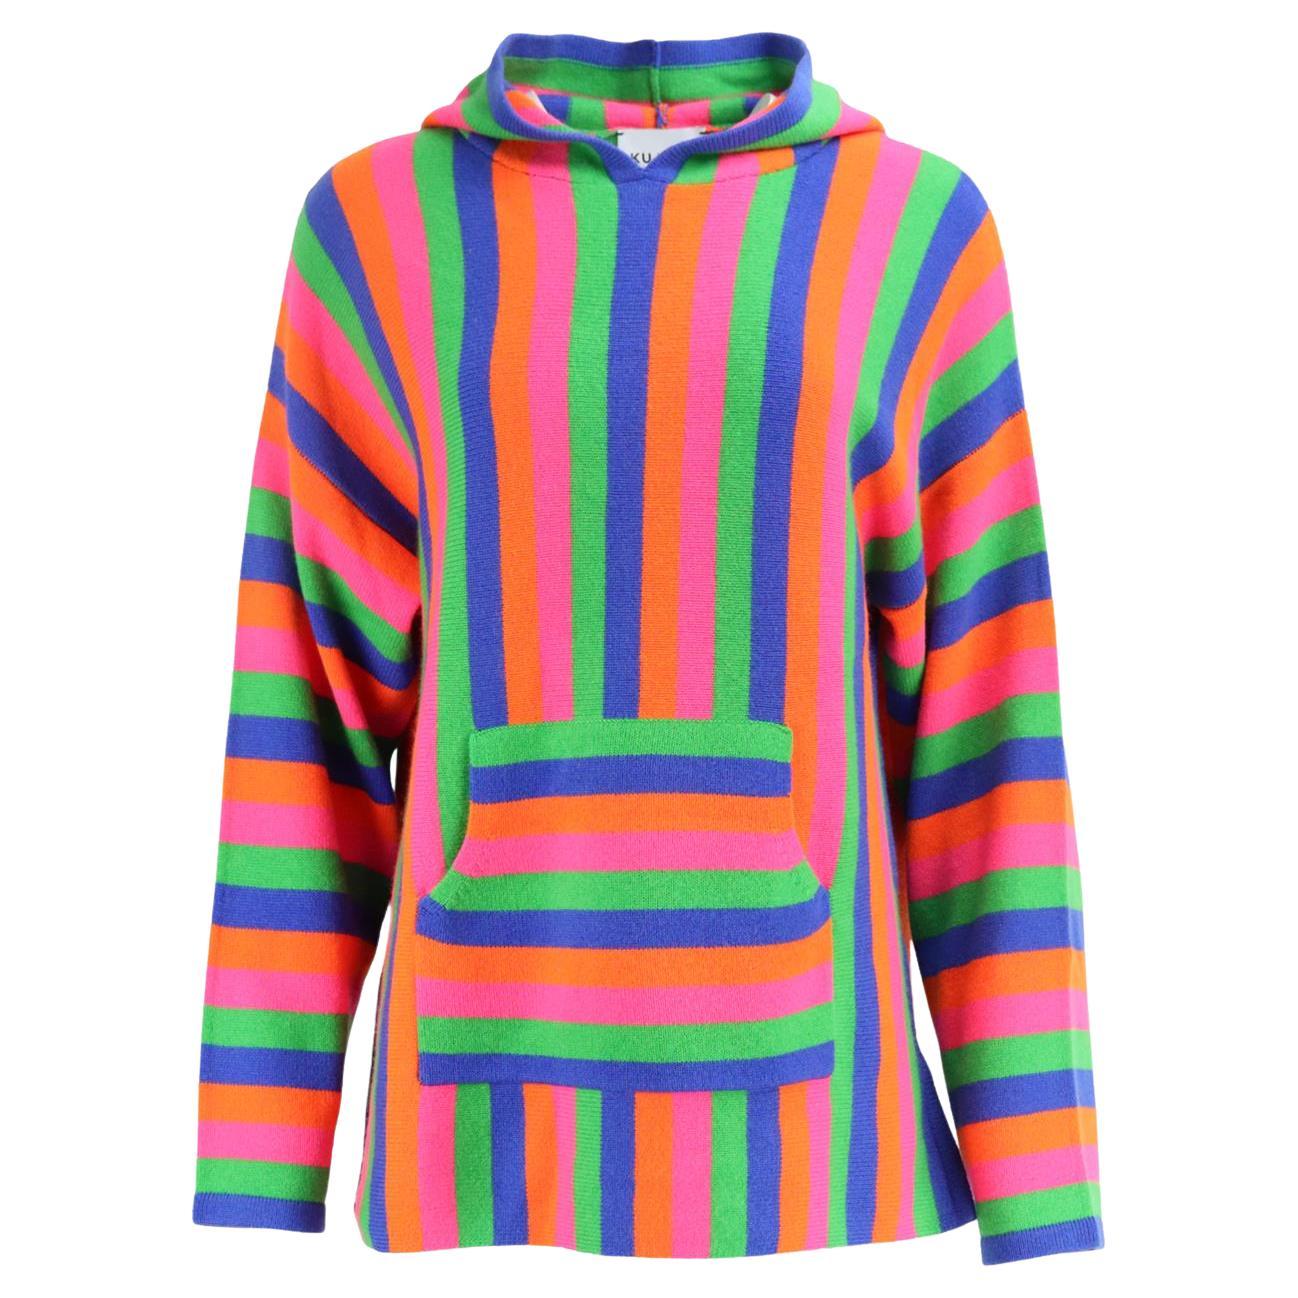 Kujten Striped Cashmere Hoodie One Size